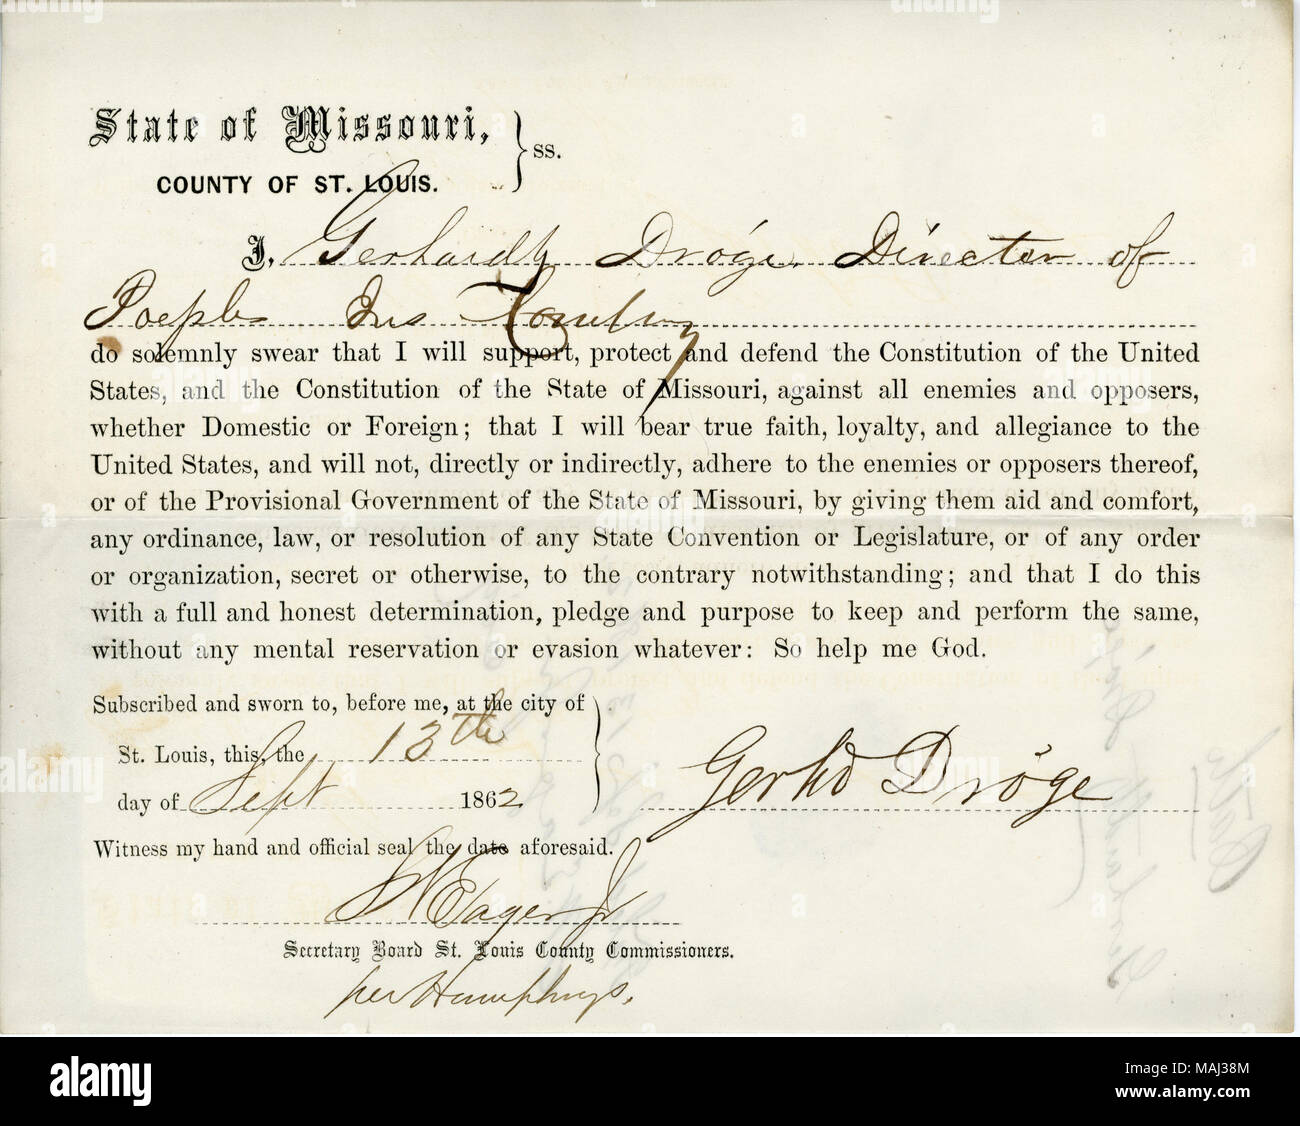 Swears oath of allegiance to the Government of the United States and the State of Missouri. Title: Loyalty oath of Gerhardt Droge of Missouri, County of St. Louis  . 13 September 1862. Drode, G. Stock Photo